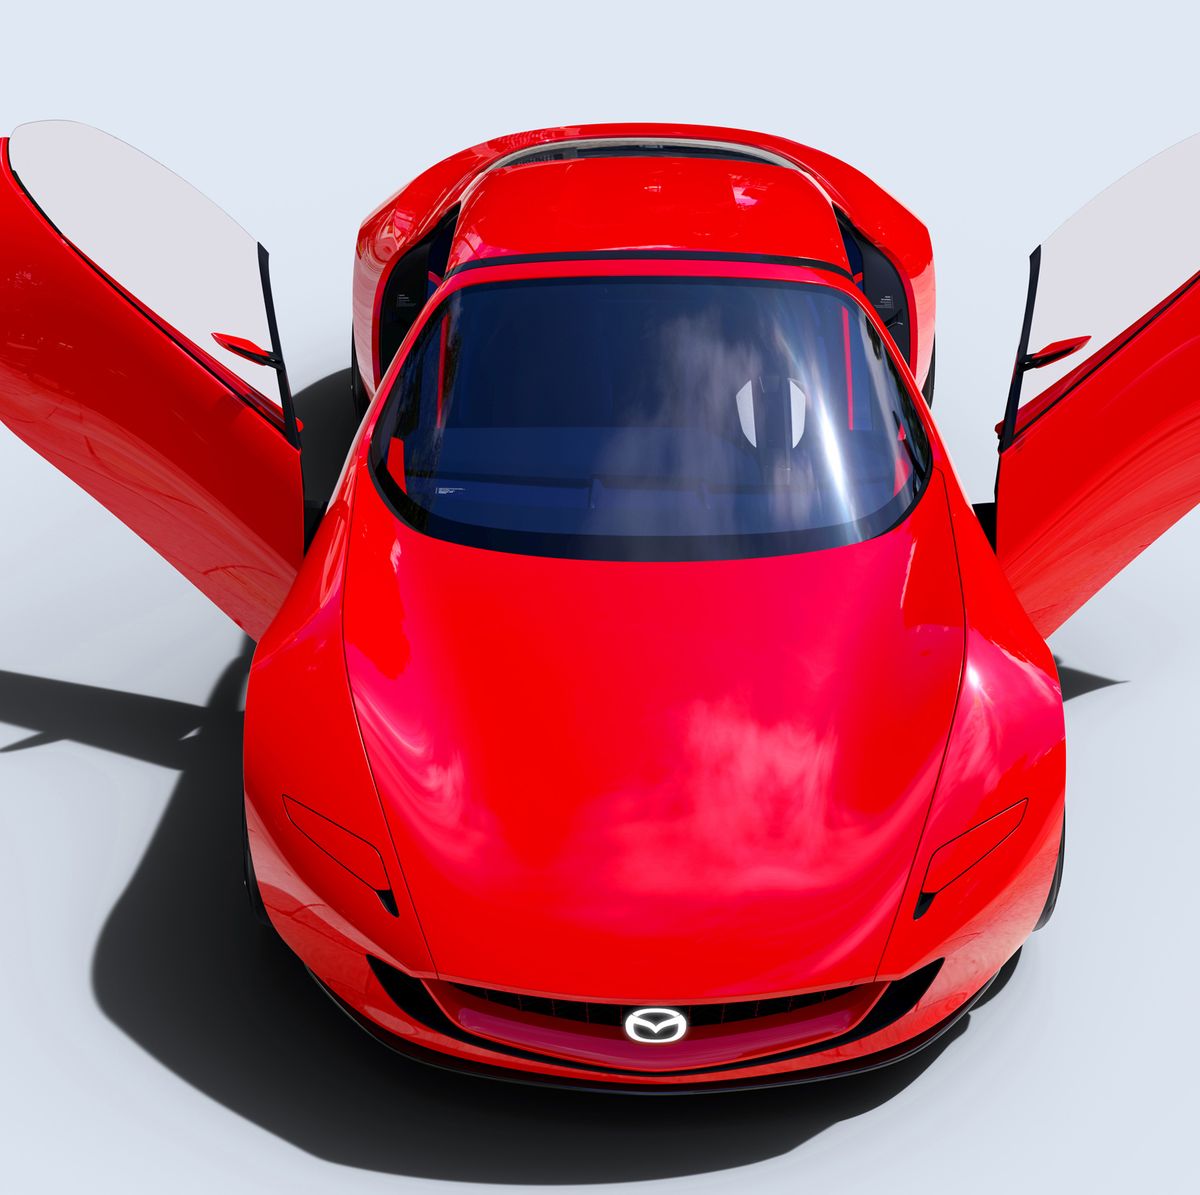 Mazda Is Advancing the Sports Car with Its EV Rotary Concept